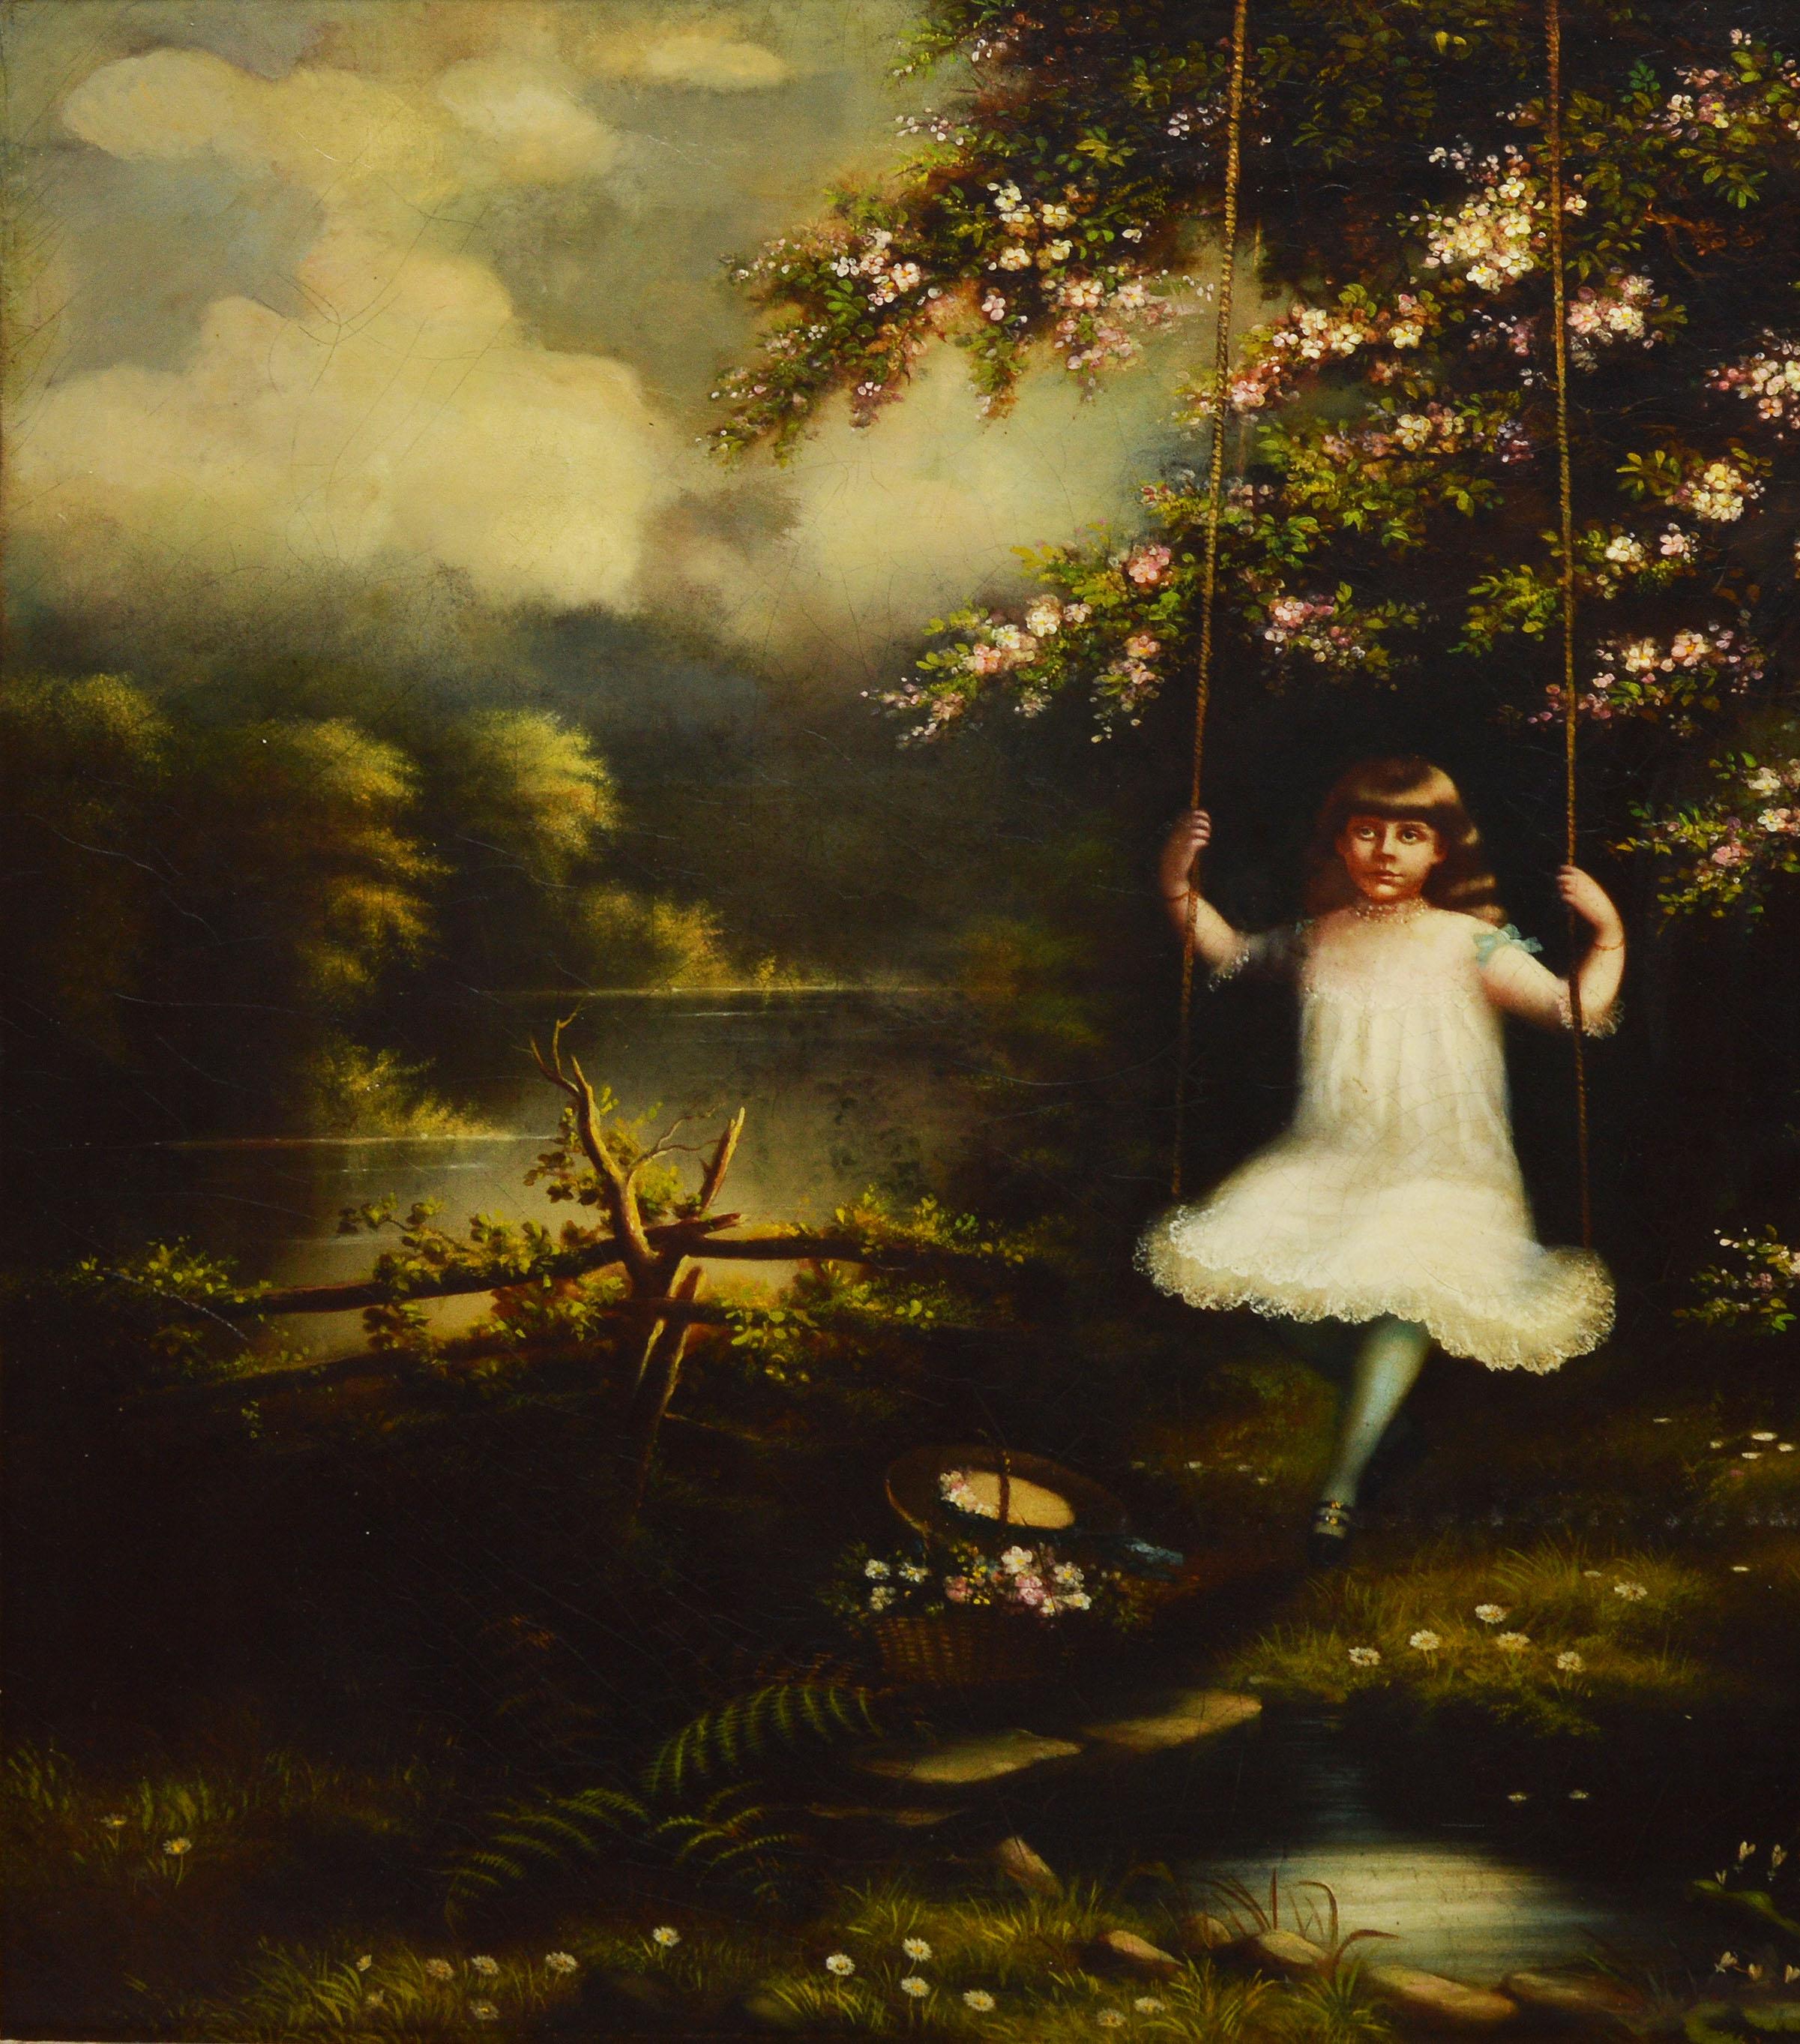 American School Landscape, Swinging by a River - Brown Landscape Painting by Unknown